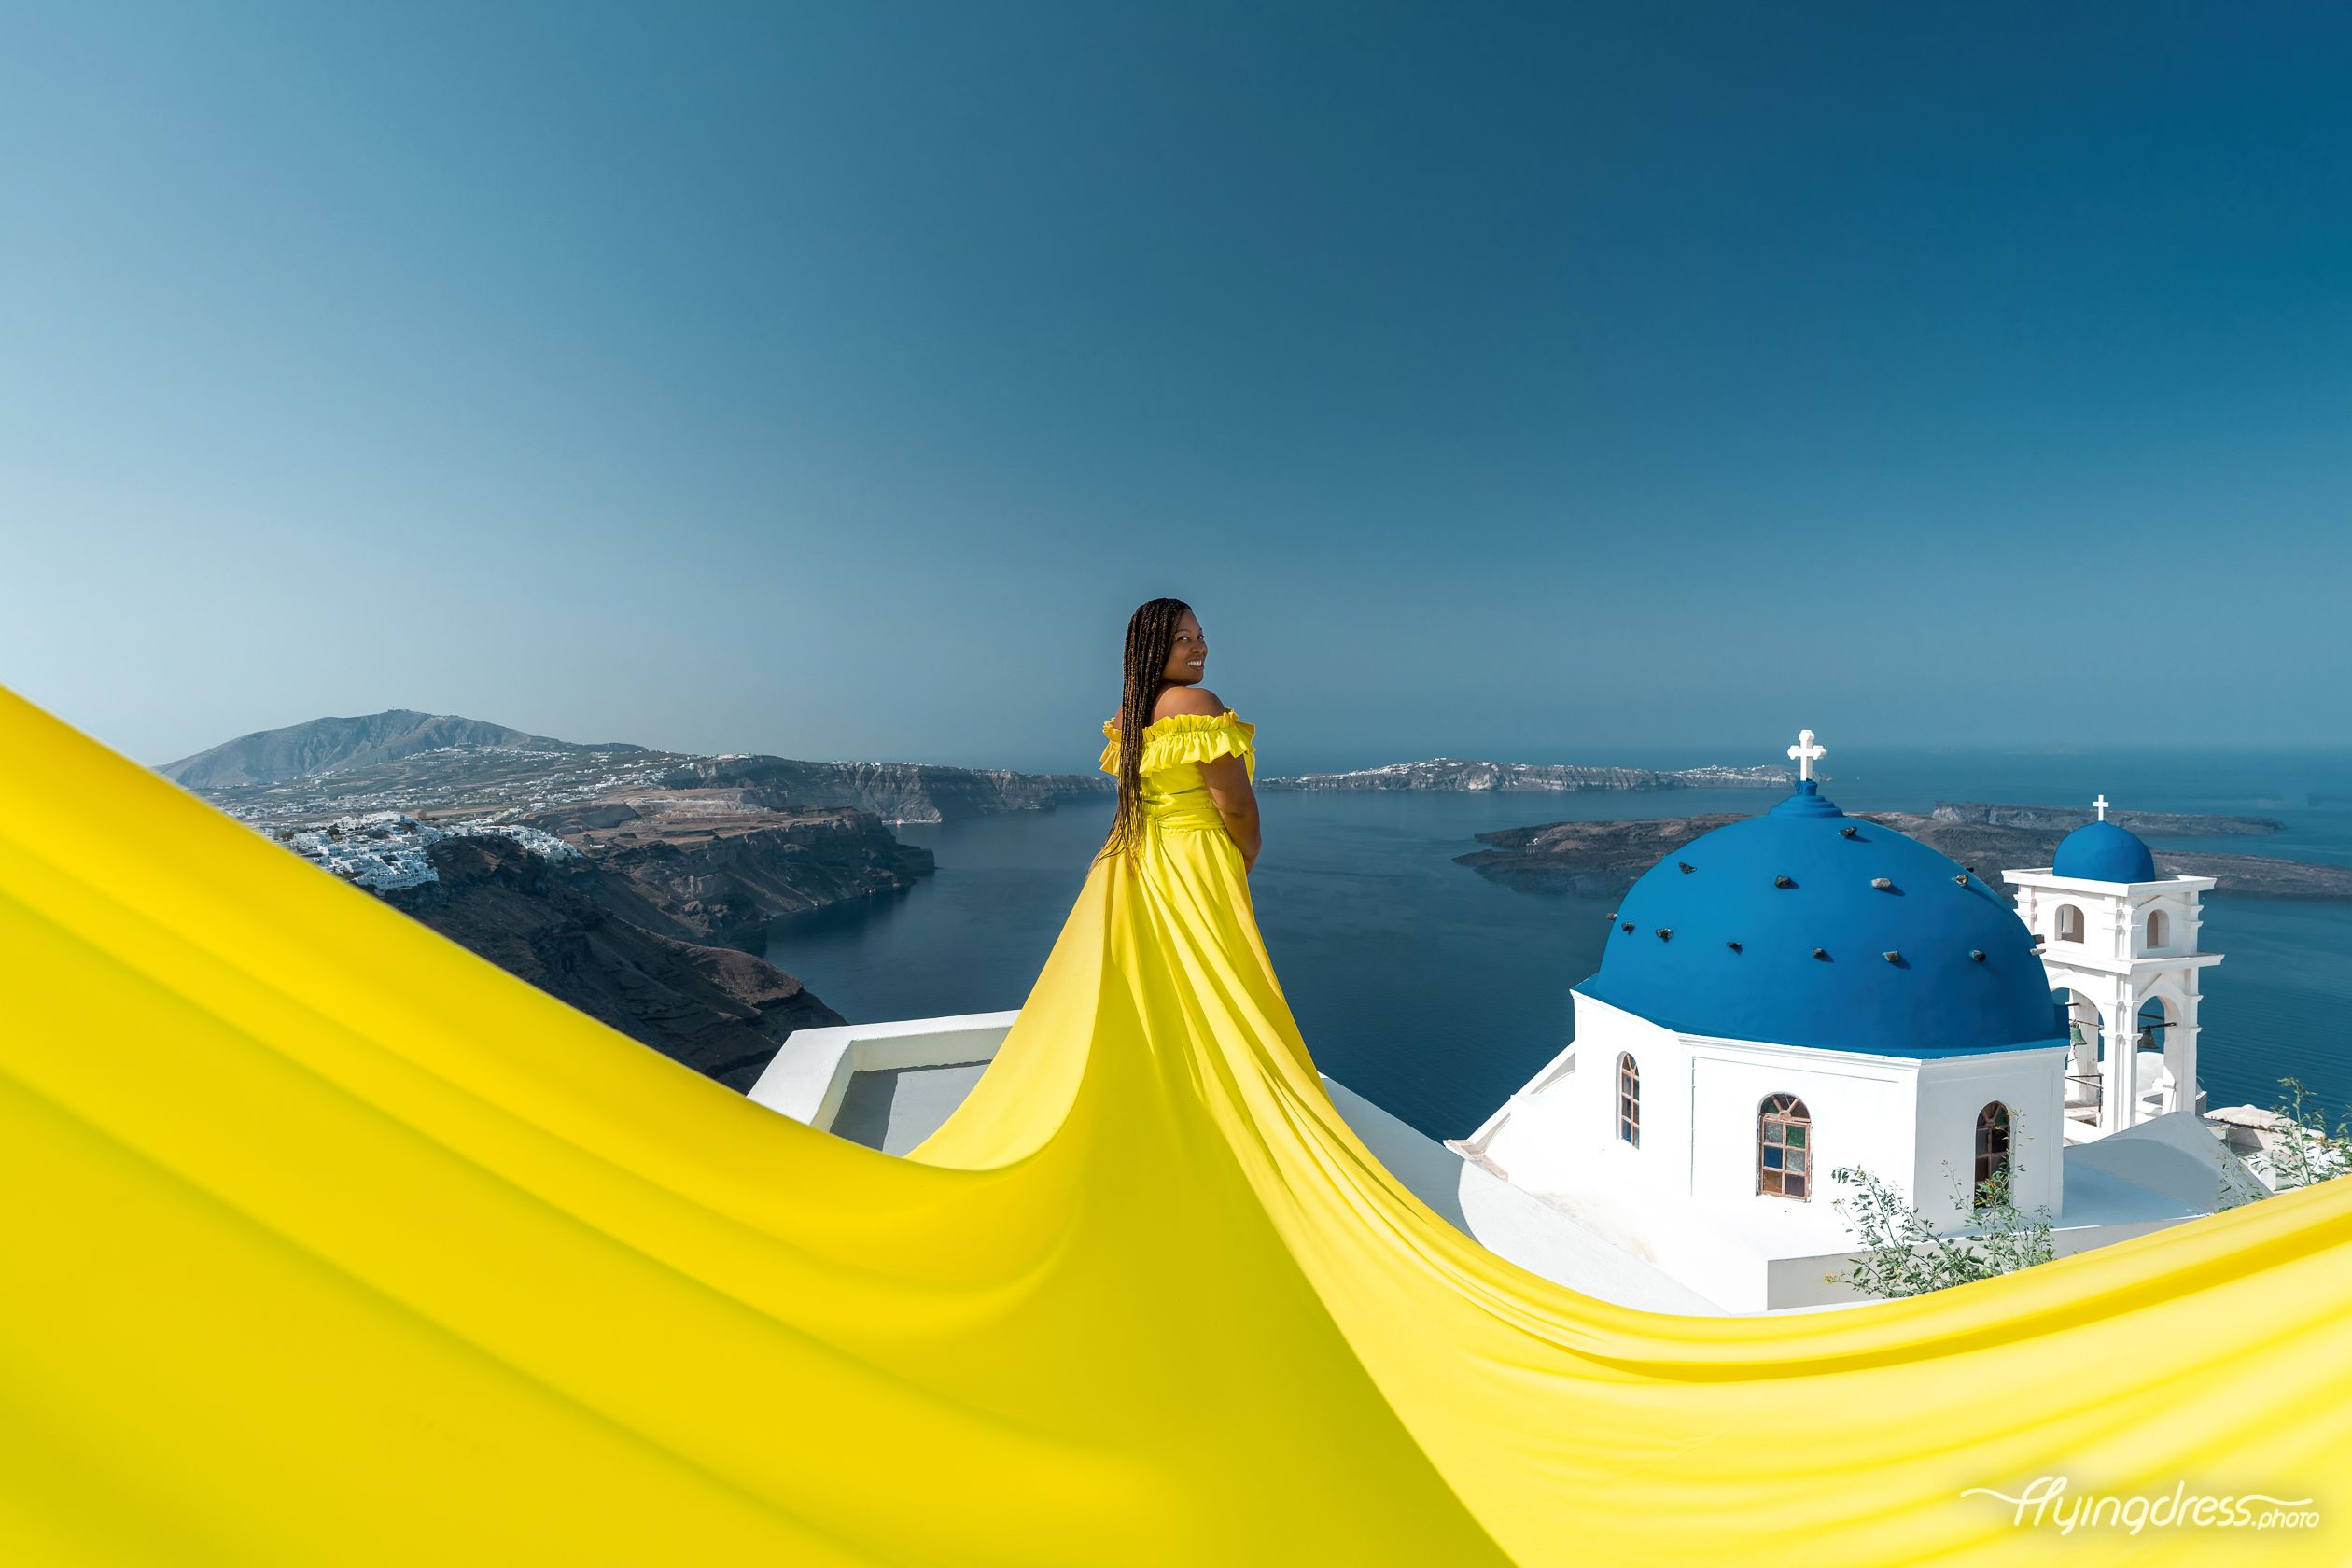 Photoshoot by the blue domes in Imerovigli with a neon yellow flying dress